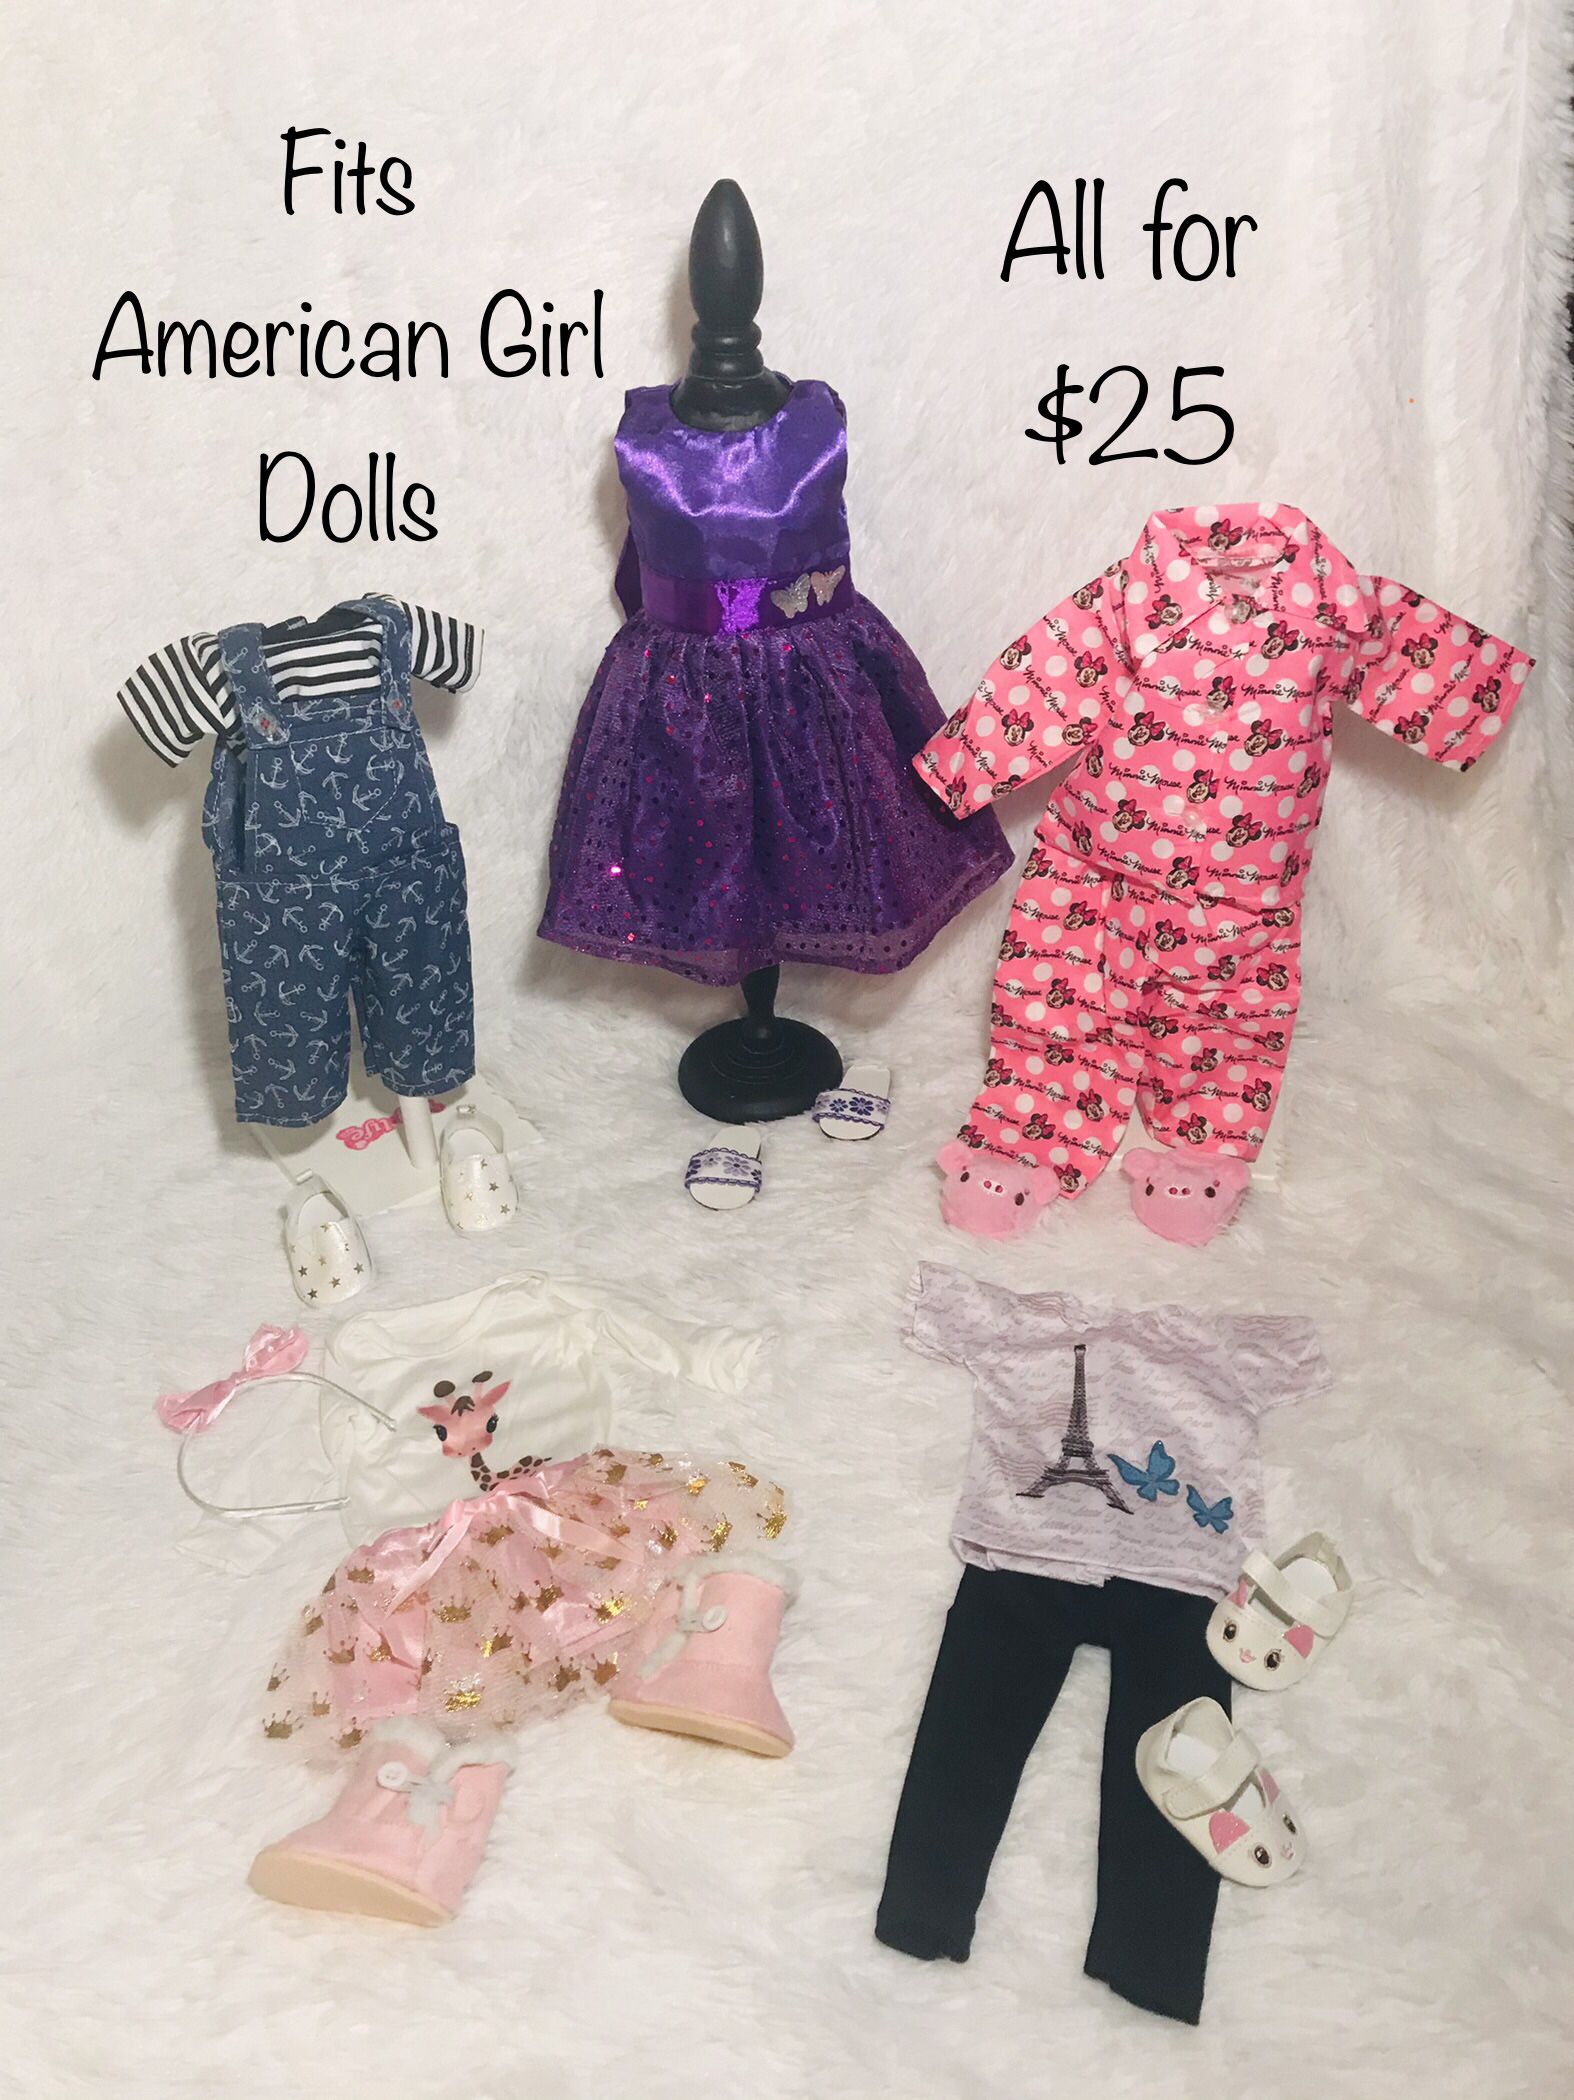 New! 18” Doll Clothes Fits American Girl Dolls